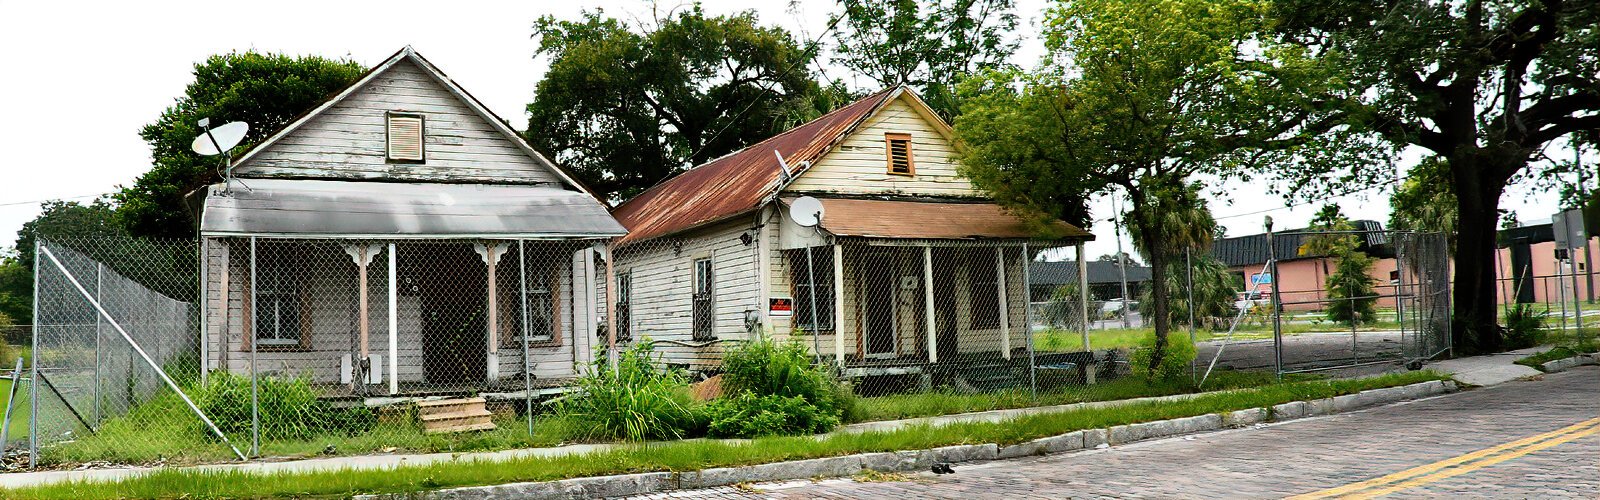  Built at the turn of the 20th century, these remaining houses from The Scrub era are now in the hands of Tampa Housing Authority to be restored as historic landmarks.